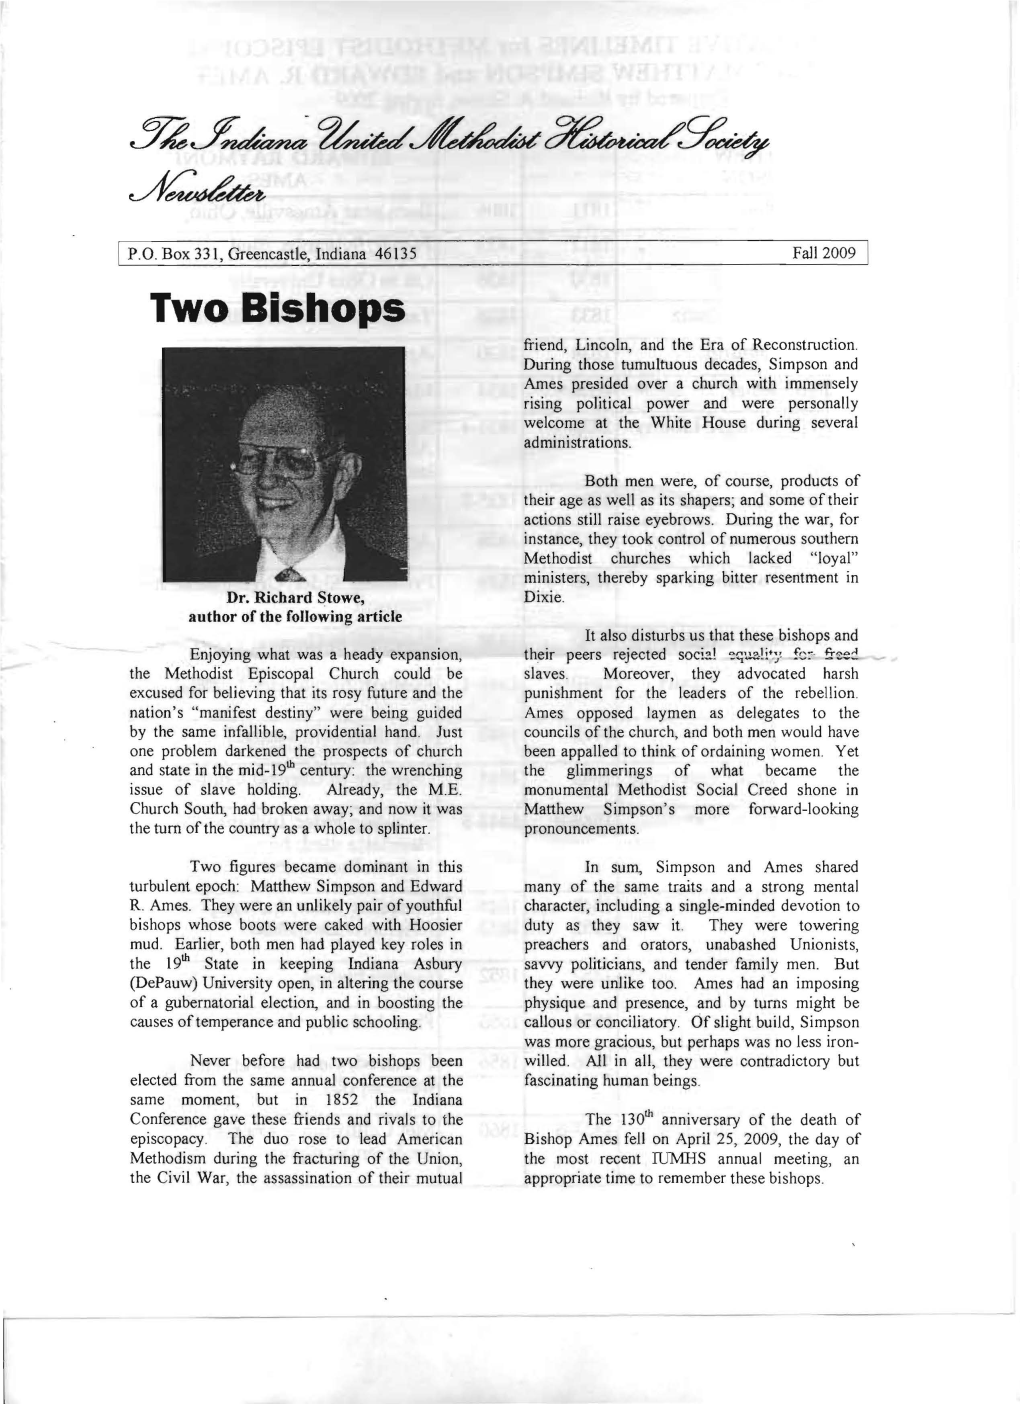 Fall 2009 I Two Bishops Friend, Lincoln, and the Era of Reconstruction